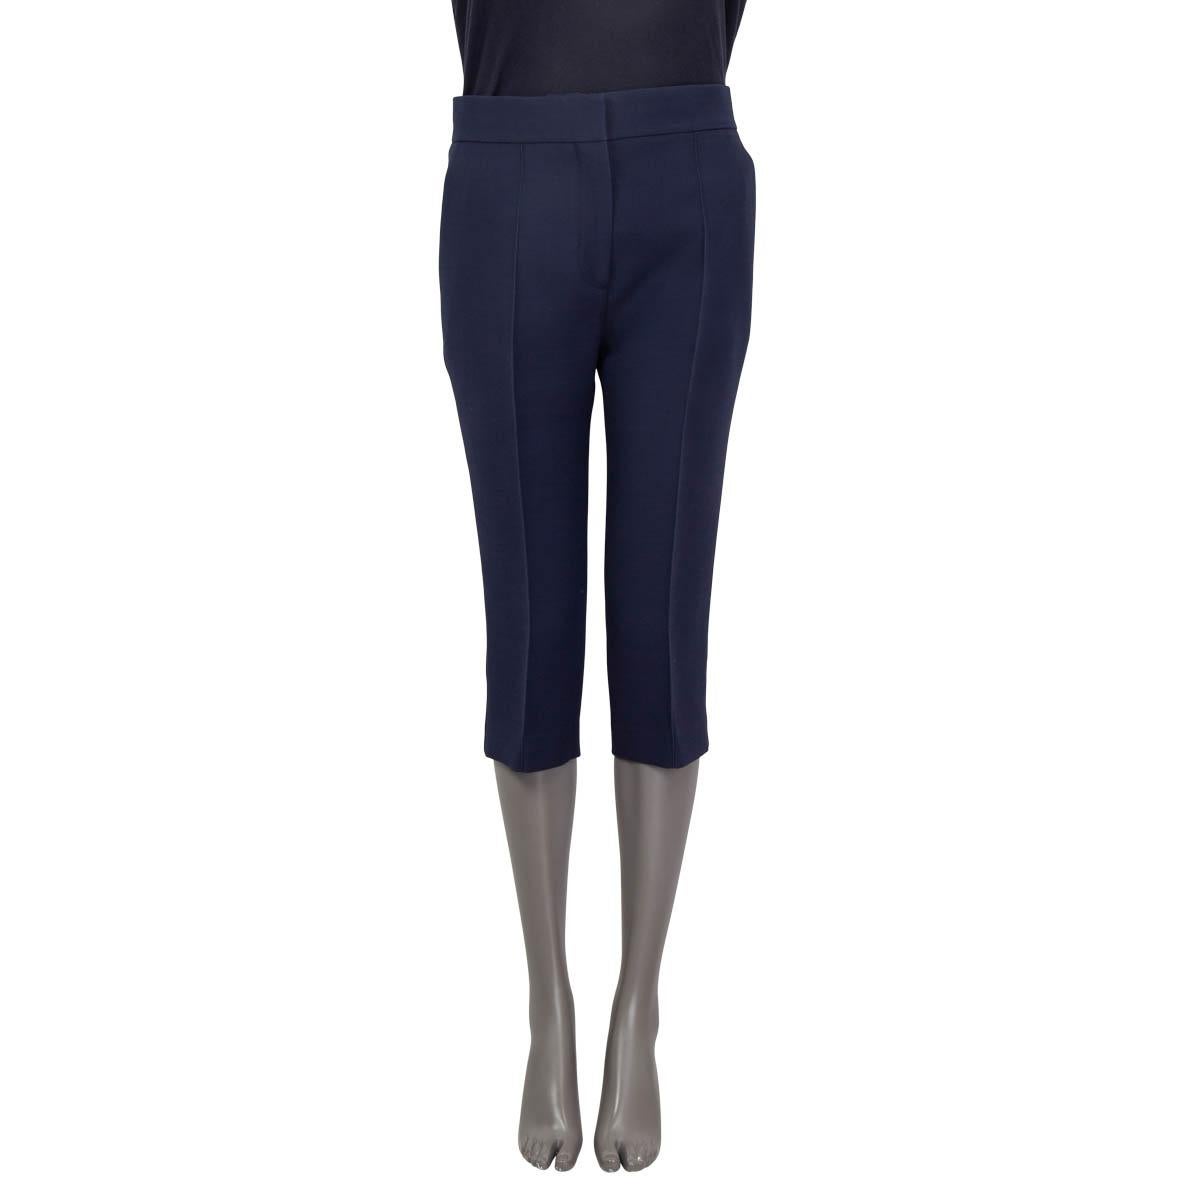 100% authentic Christian Dior below-knee suit pants in navy blue wool (77%) and silk (23%). Features two two slit pockets on the front and two slit pockets on the back. Opens with a concealed hook, button and zipper on the front. Unlined. Have been